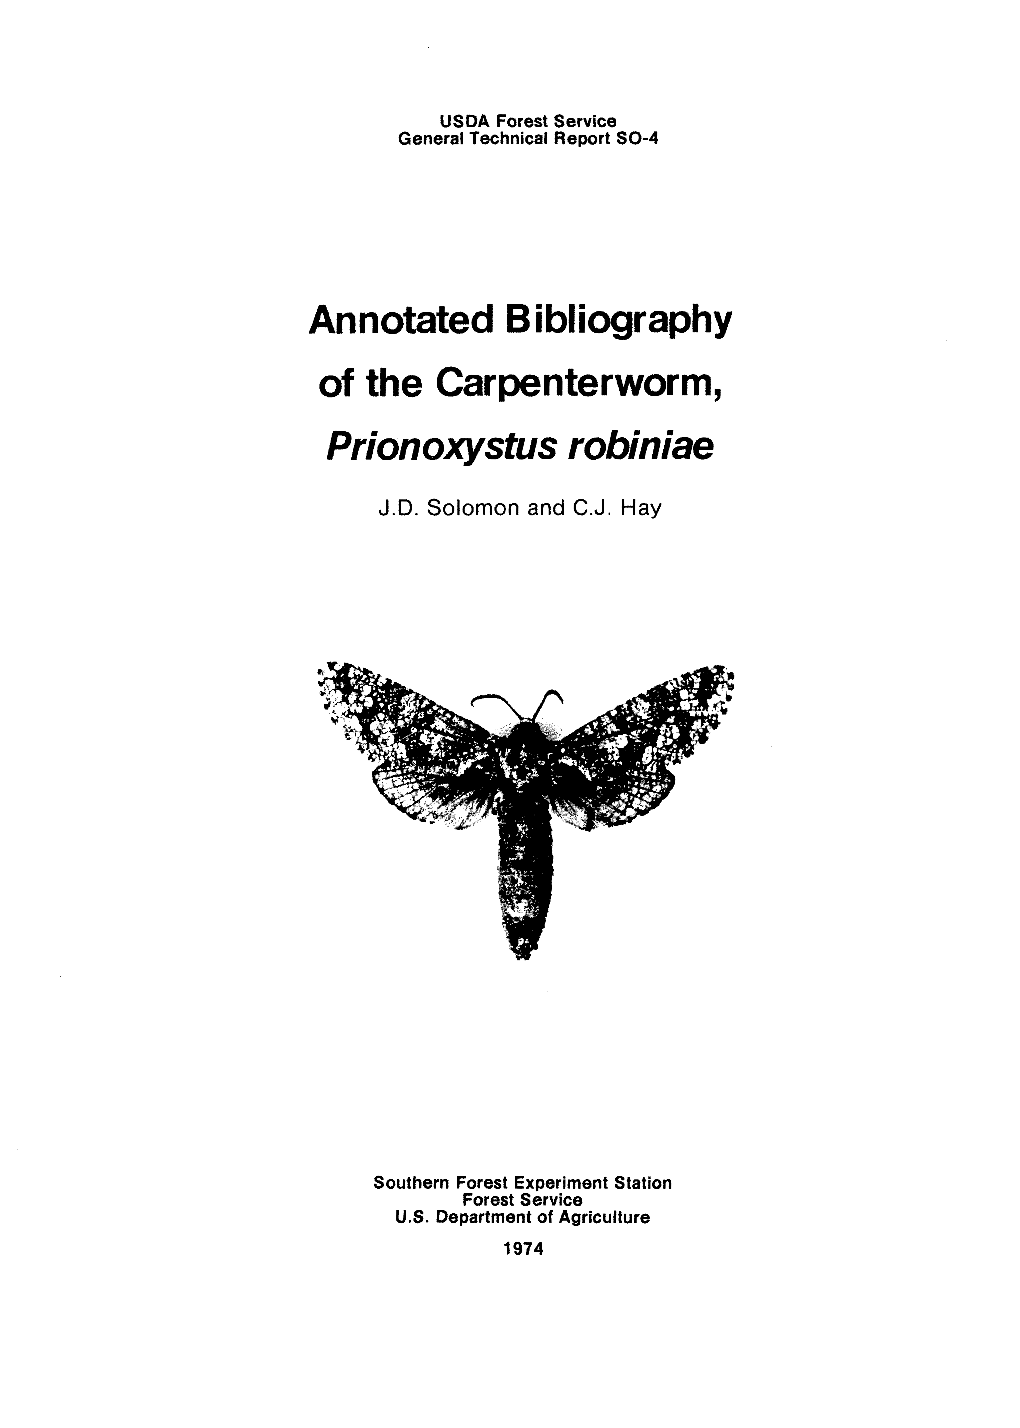 Annotated Bibliography of the Carpenterworm, Prionoxystus Robiniae